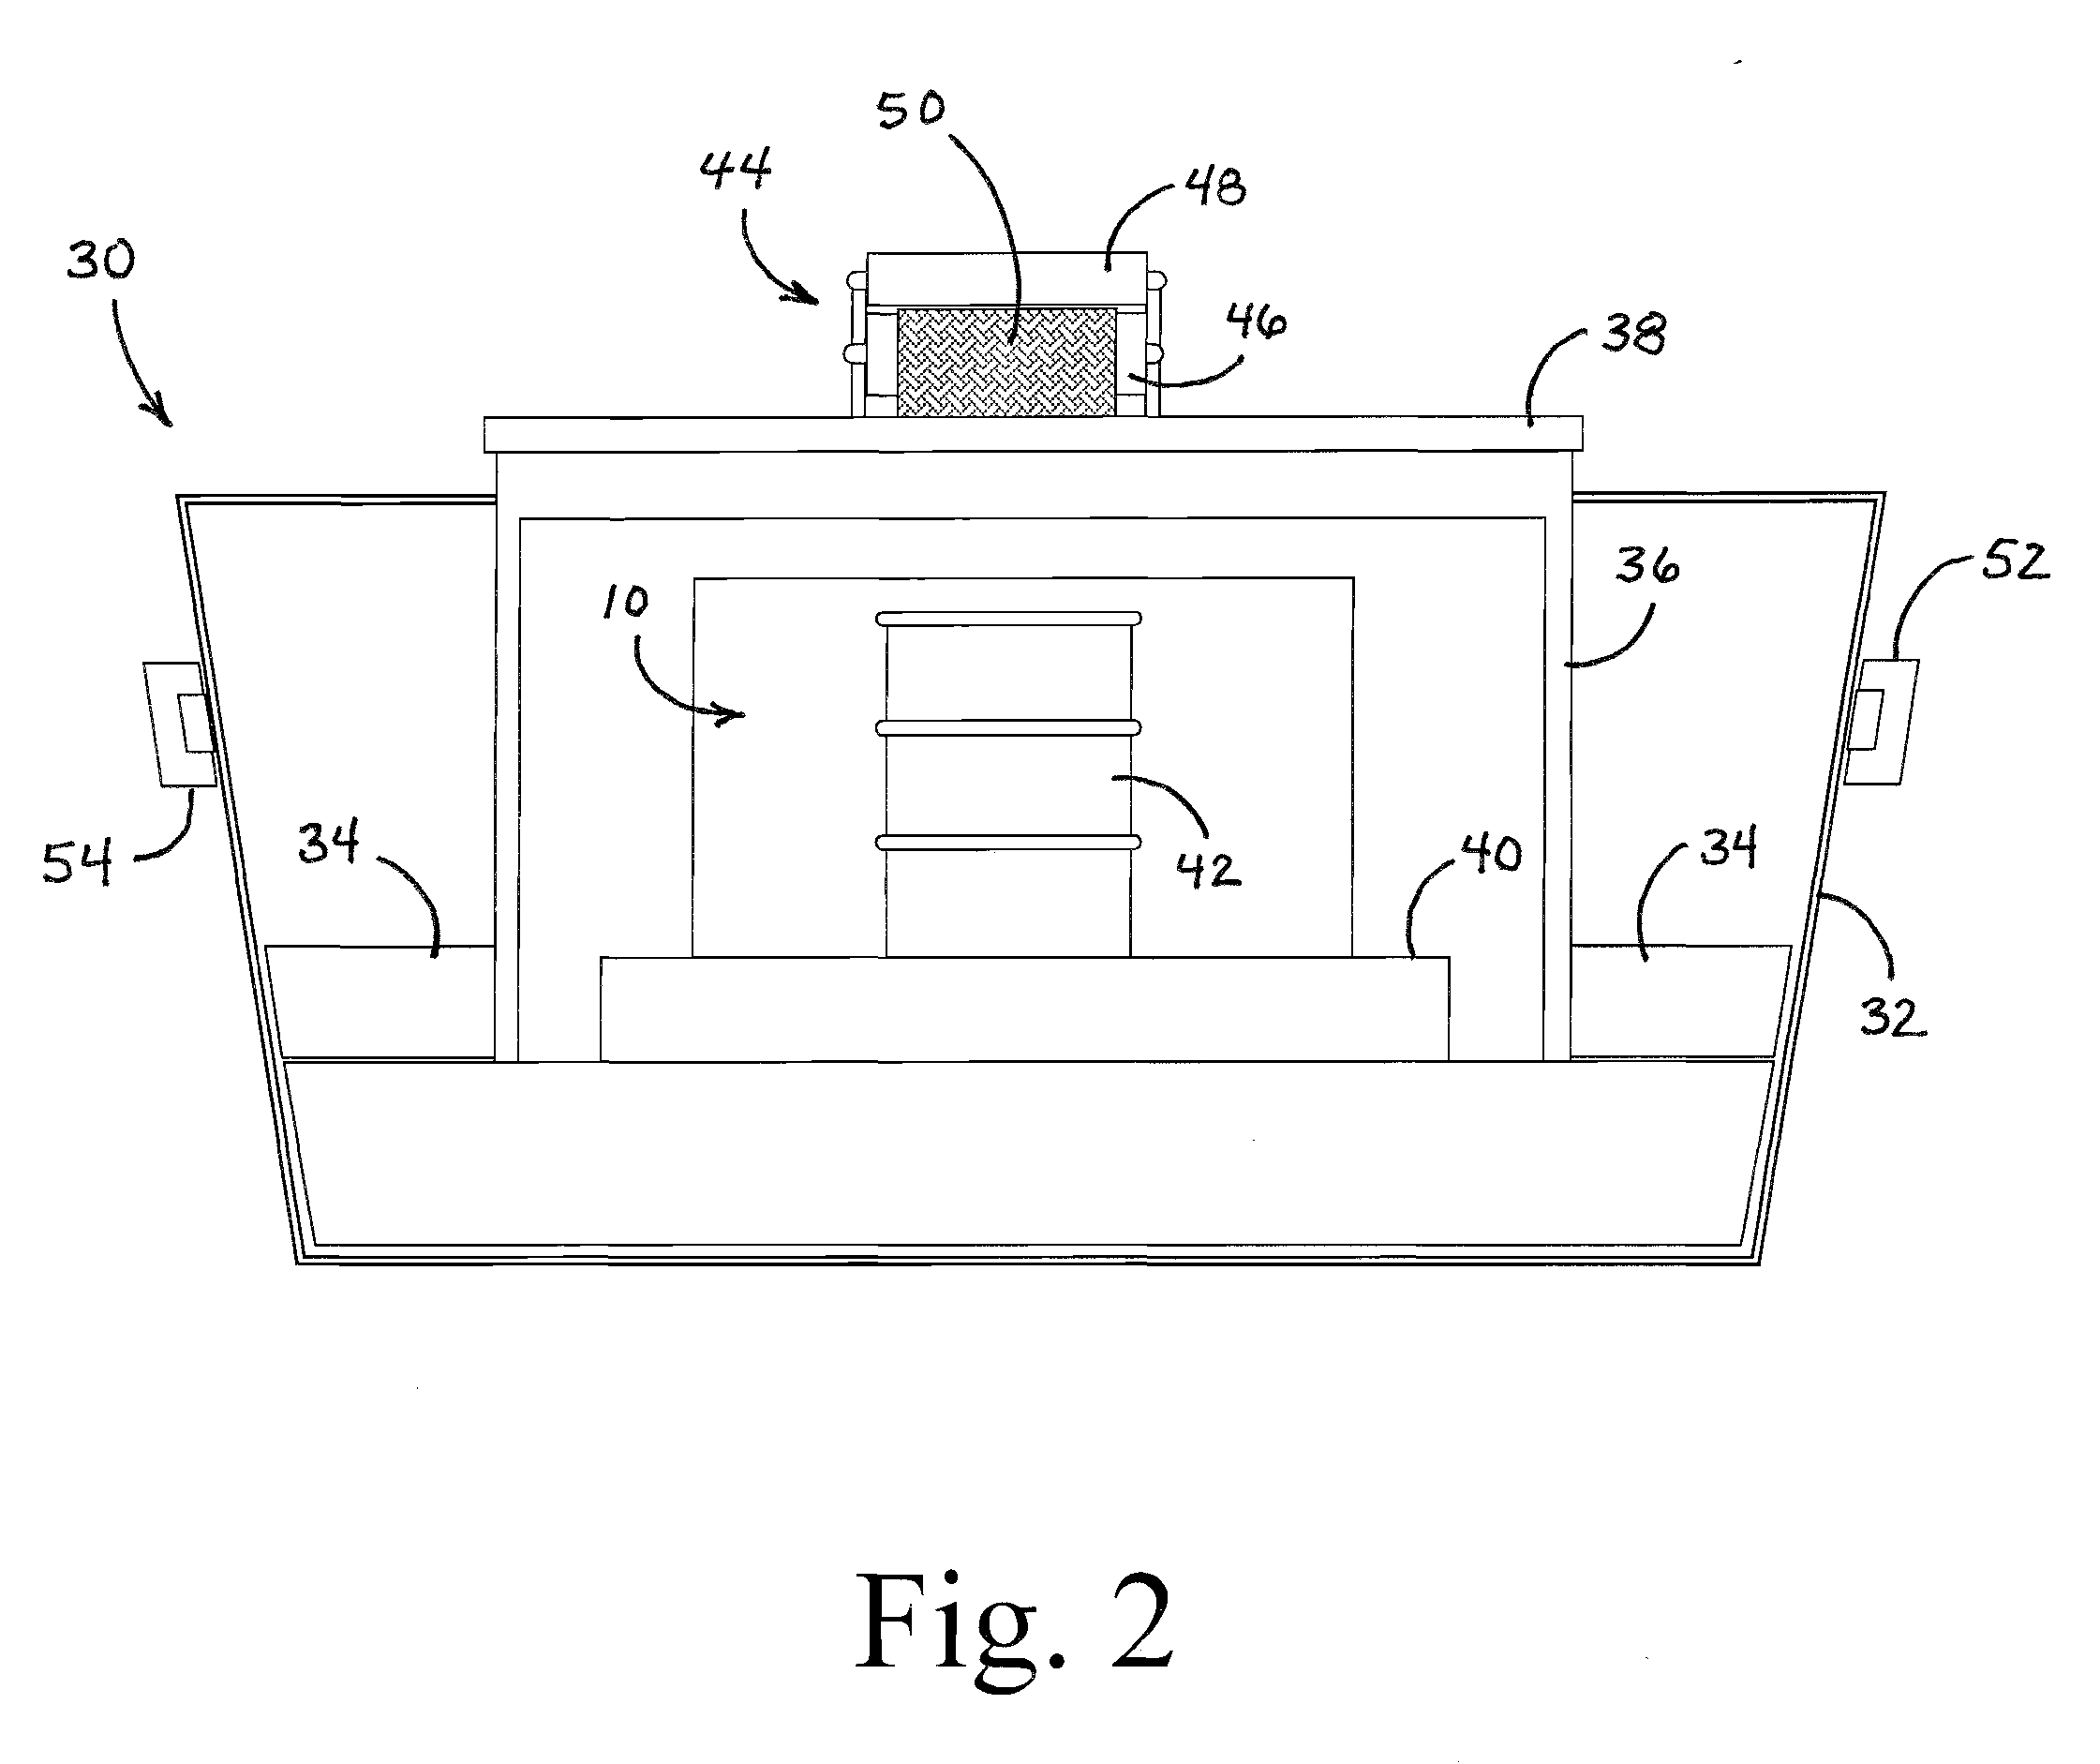 System and Method for Extraction of Petroleum from Oil/Water Mixture